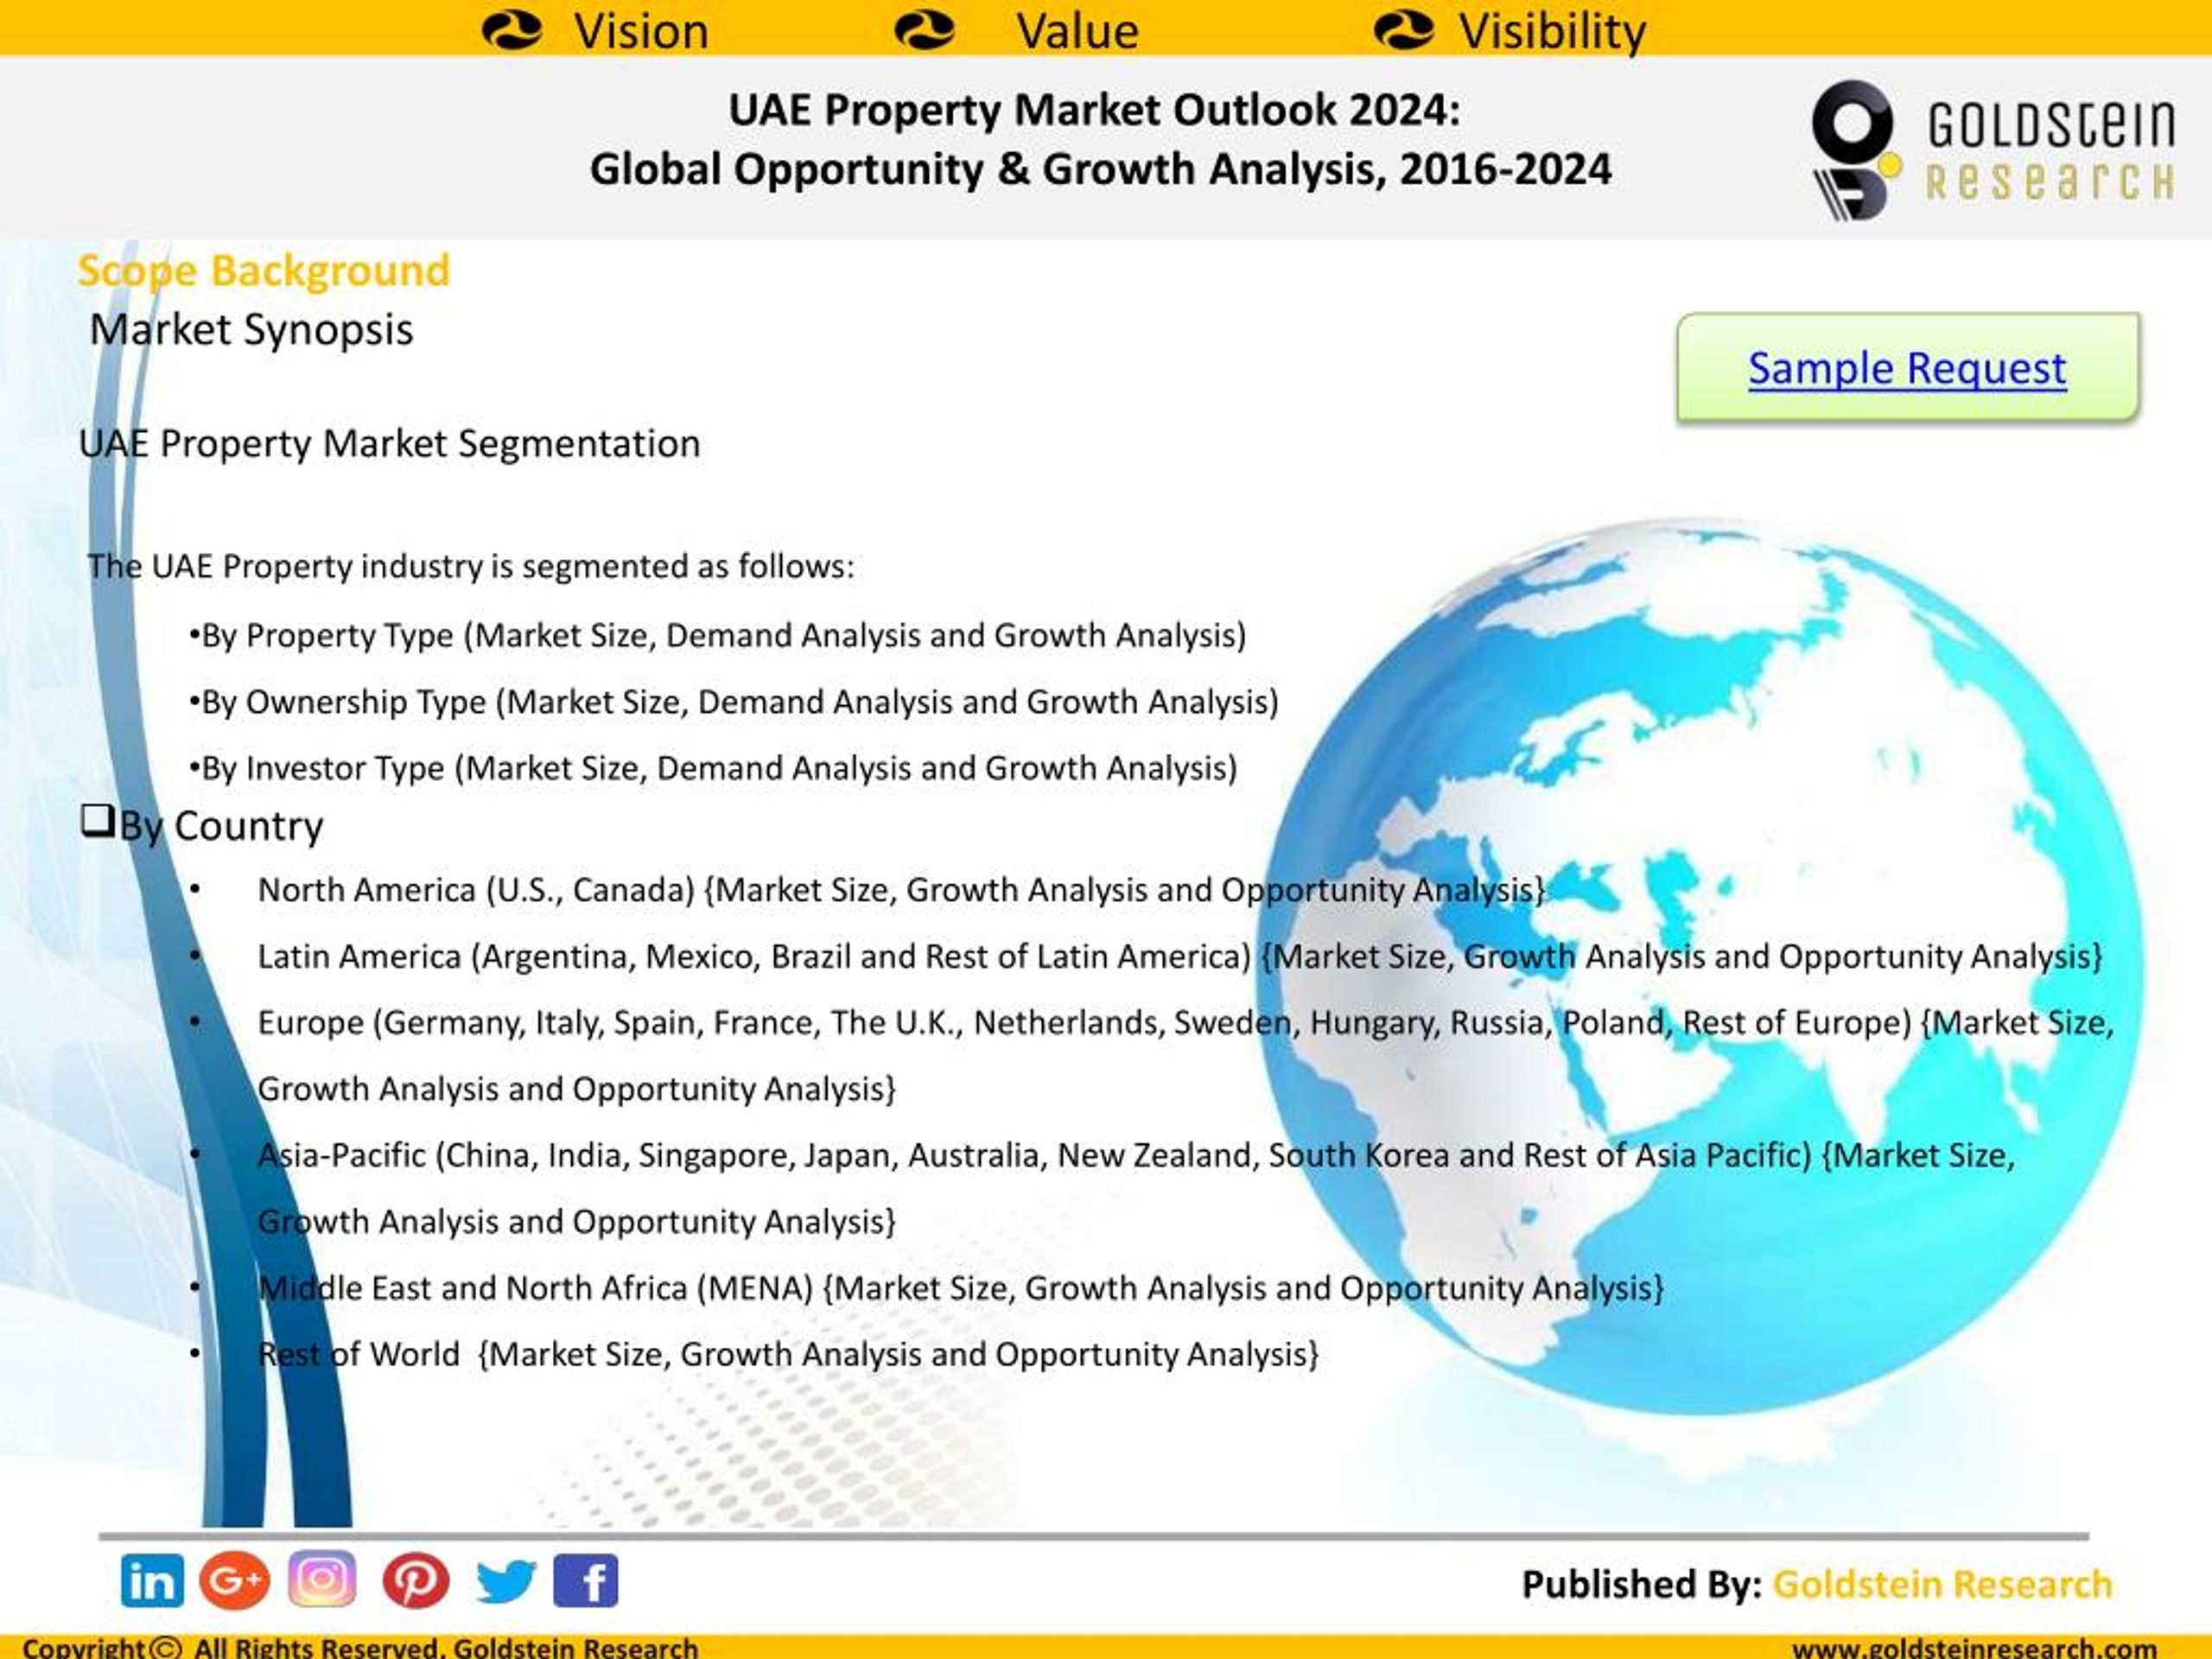 PPT UAE Property Market Outlook 2024 Global Opportunity & Growth